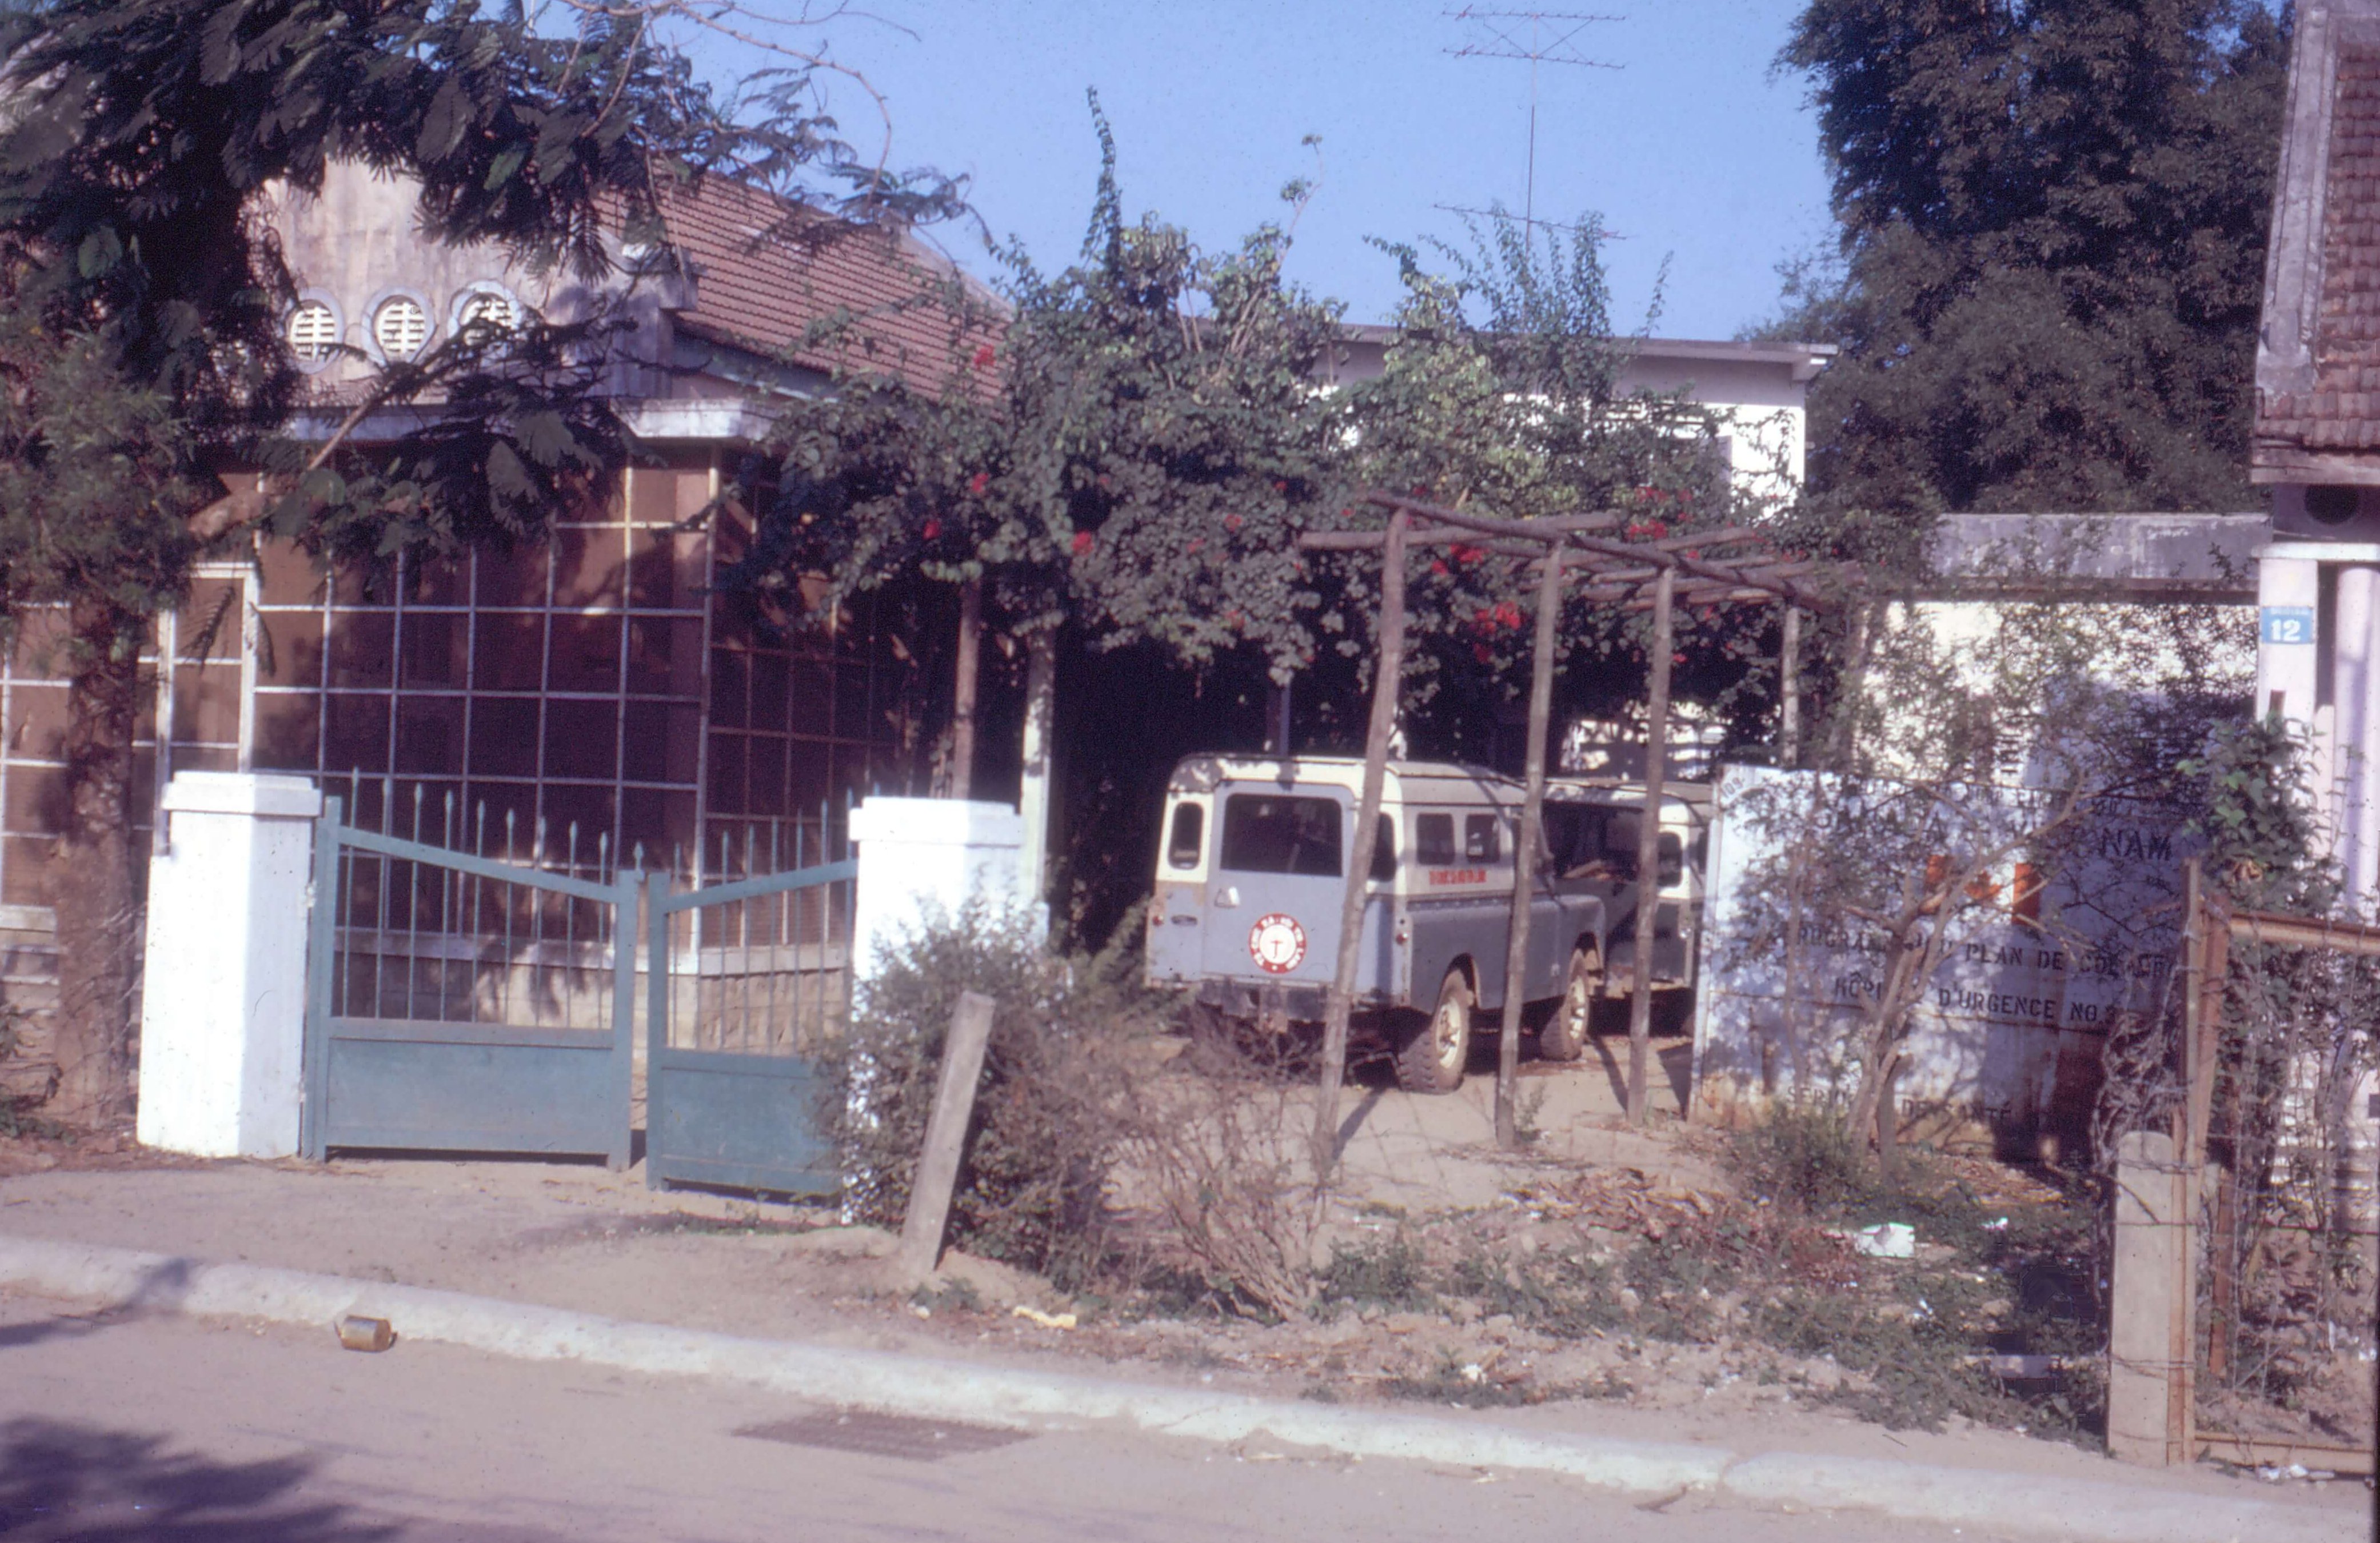 Exterior of an Asian house and its adjacent pergola, with cars parked beneath.